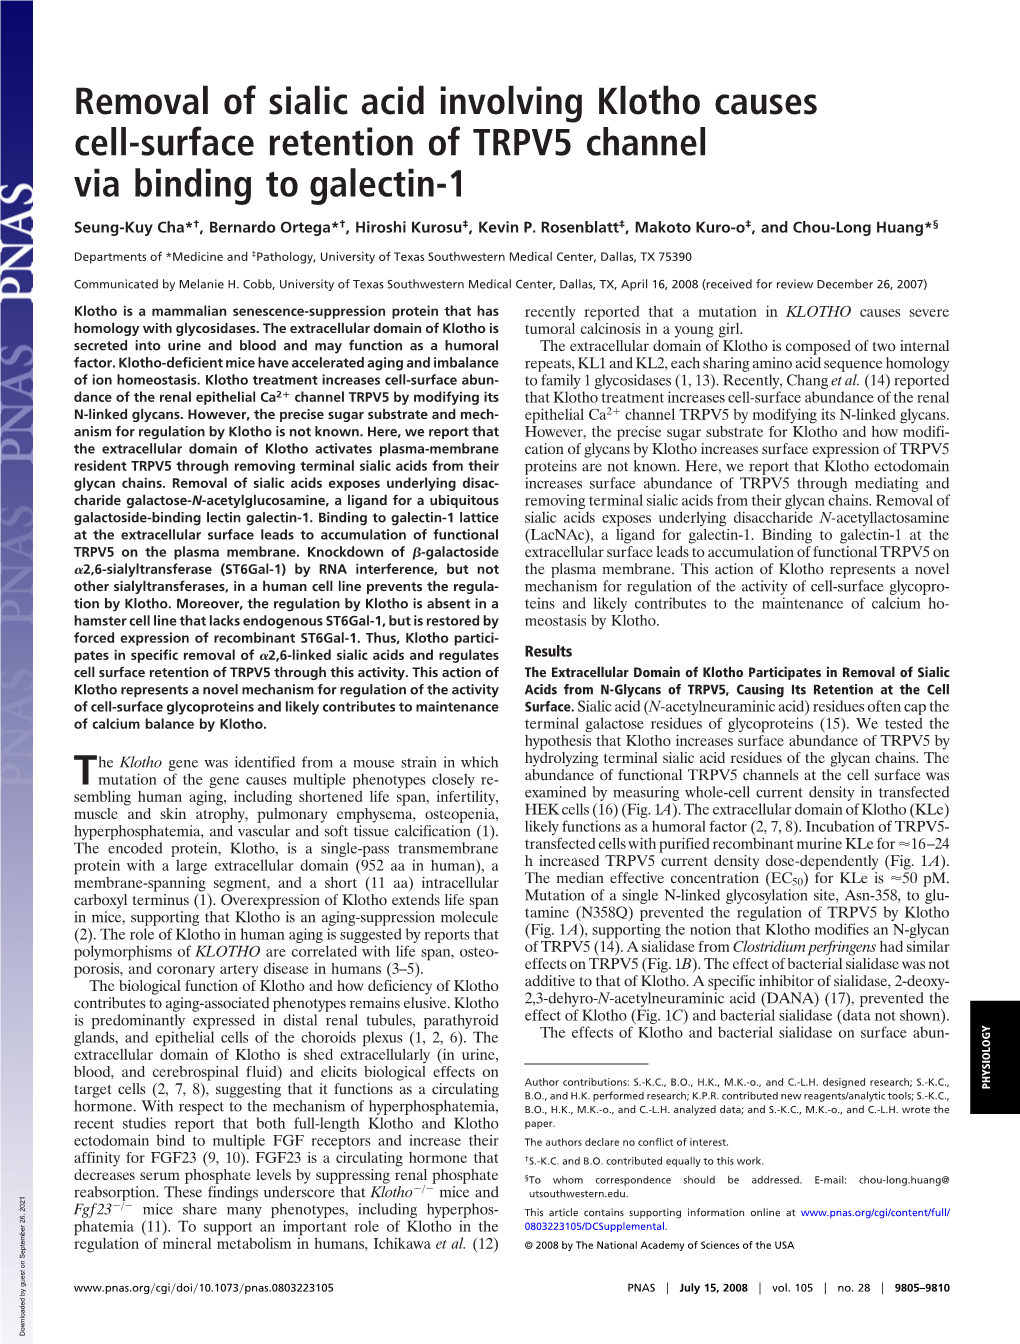 Removal of Sialic Acid Involving Klotho Causes Cell-Surface Retention of TRPV5 Channel Via Binding to Galectin-1